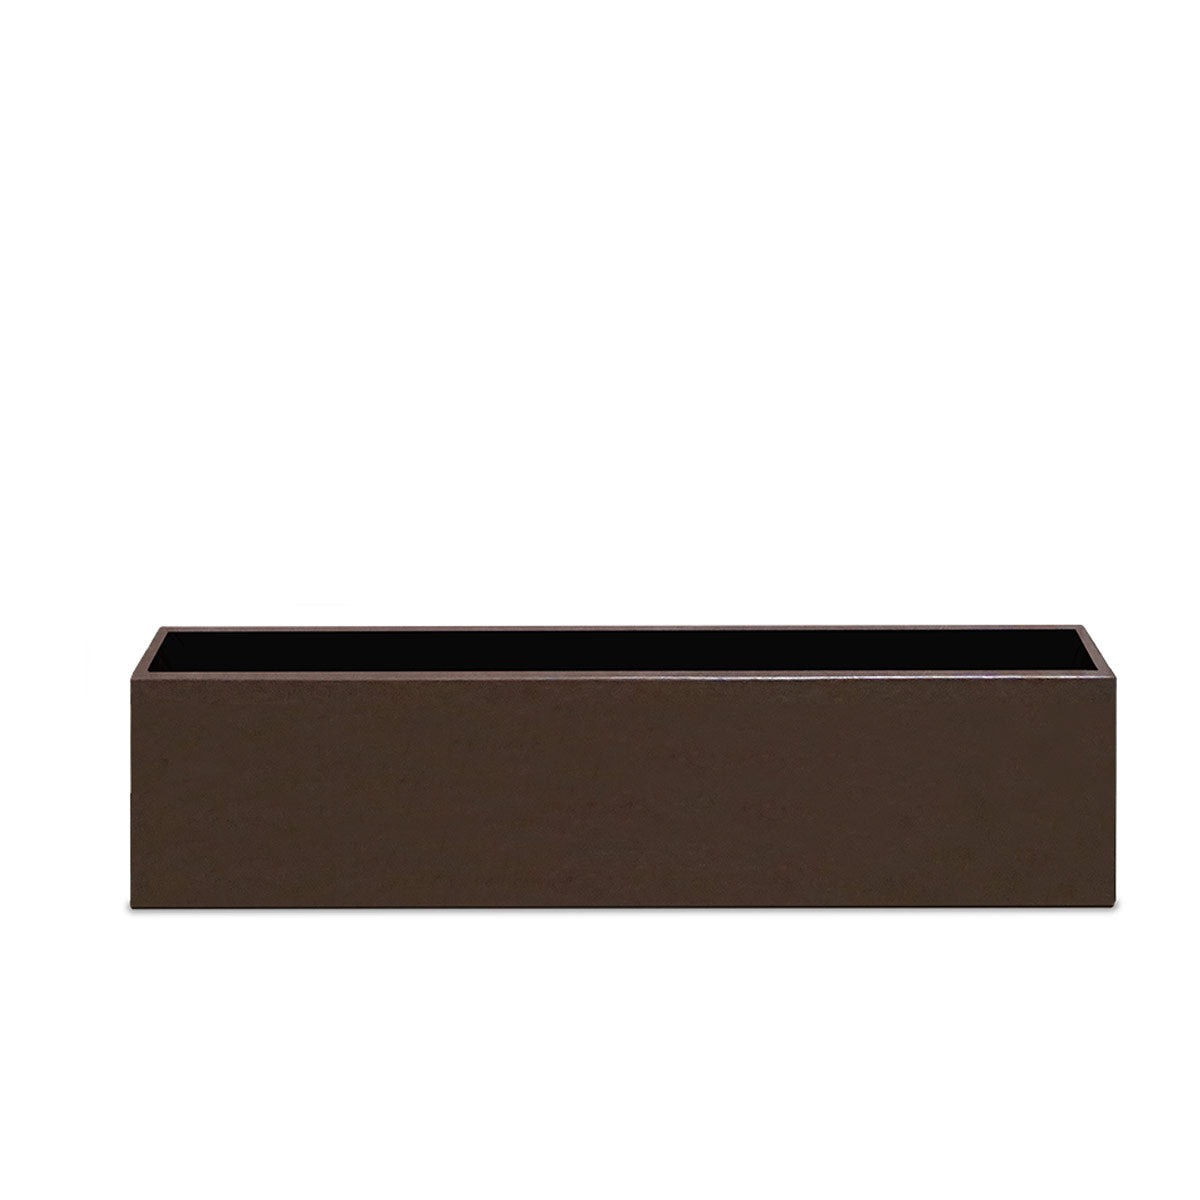 Rectangle Planter for Base of Movable Partition Wall, Bronze Black